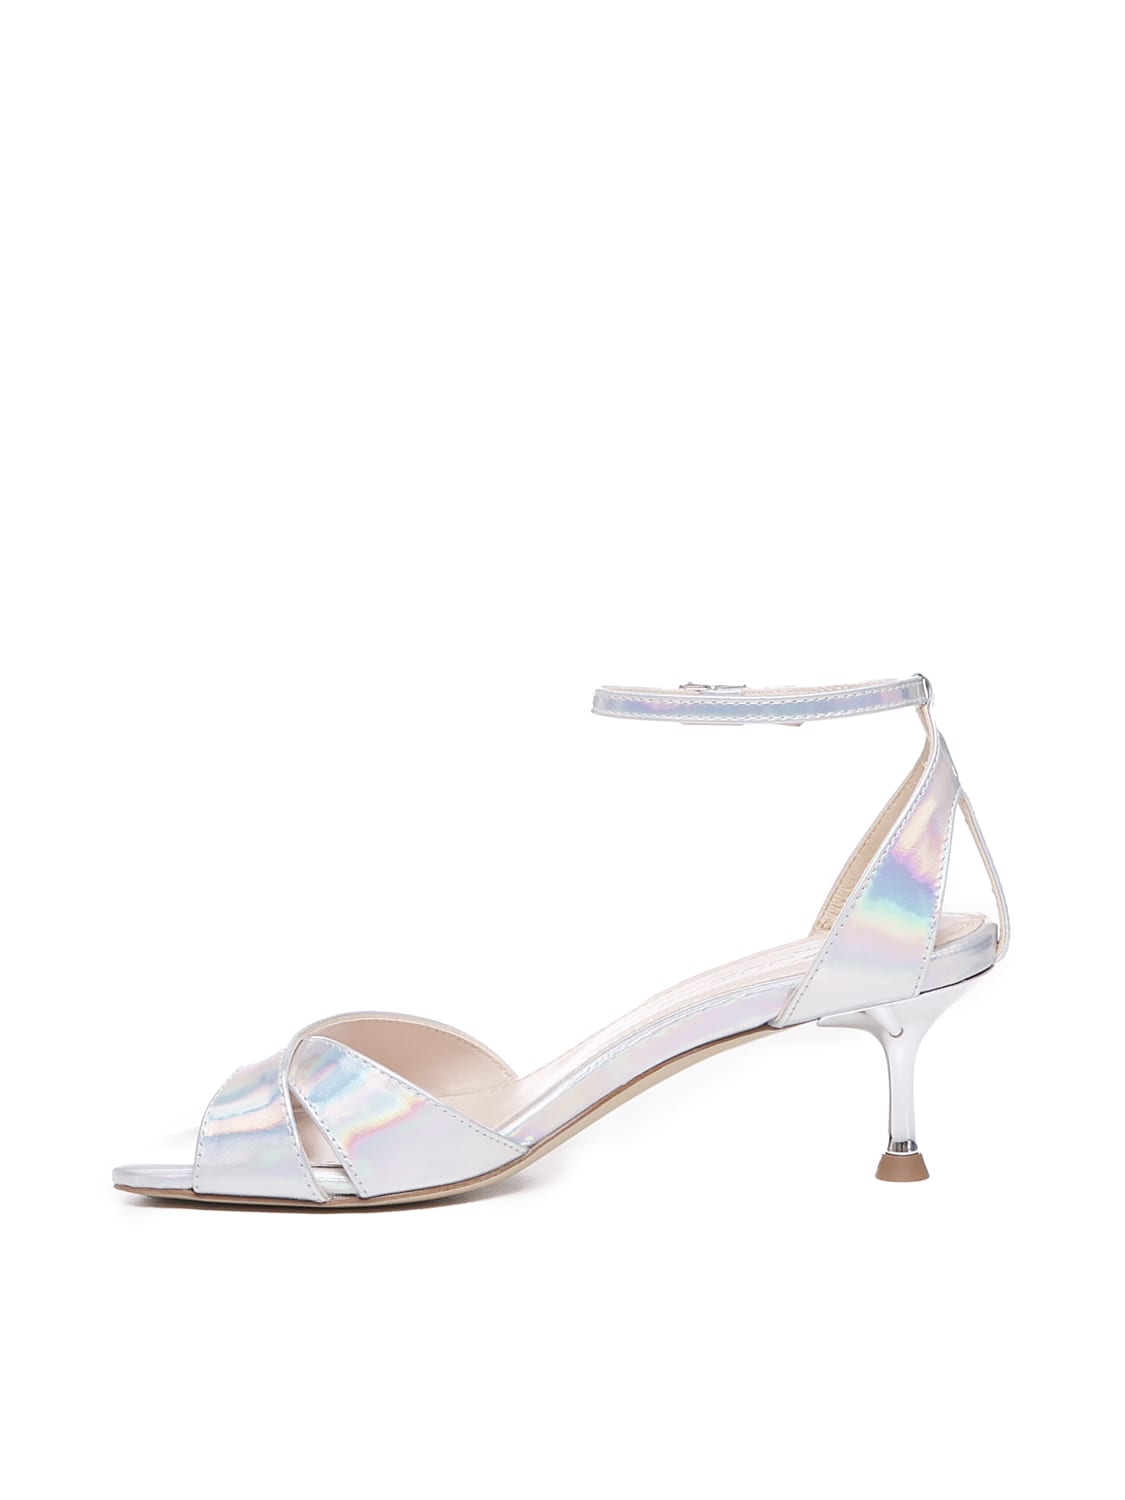 Shop Alchimia Heeled And Strappy Sandals In Silver